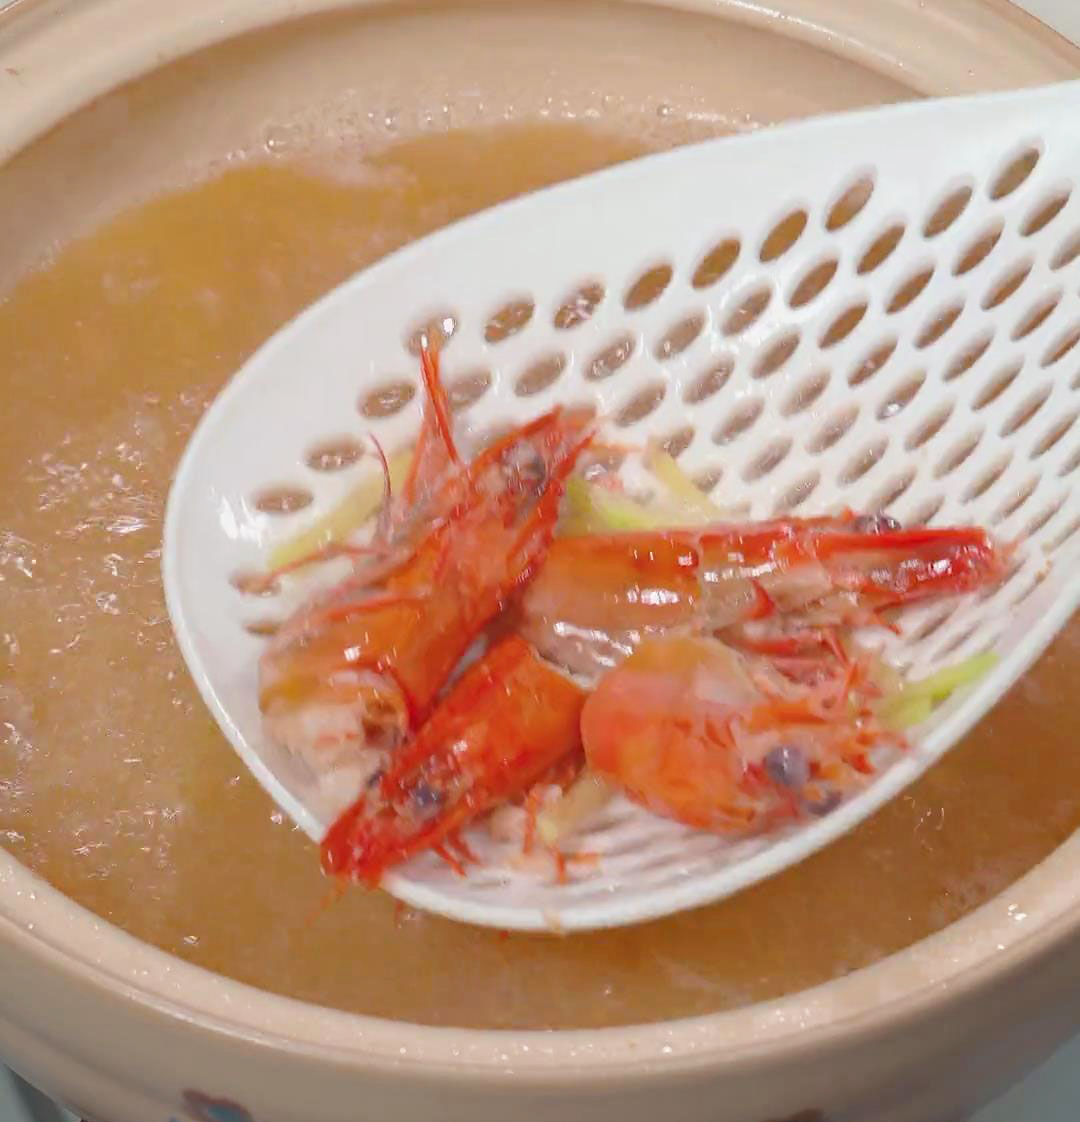 Remove the shrimp heads using a strainer